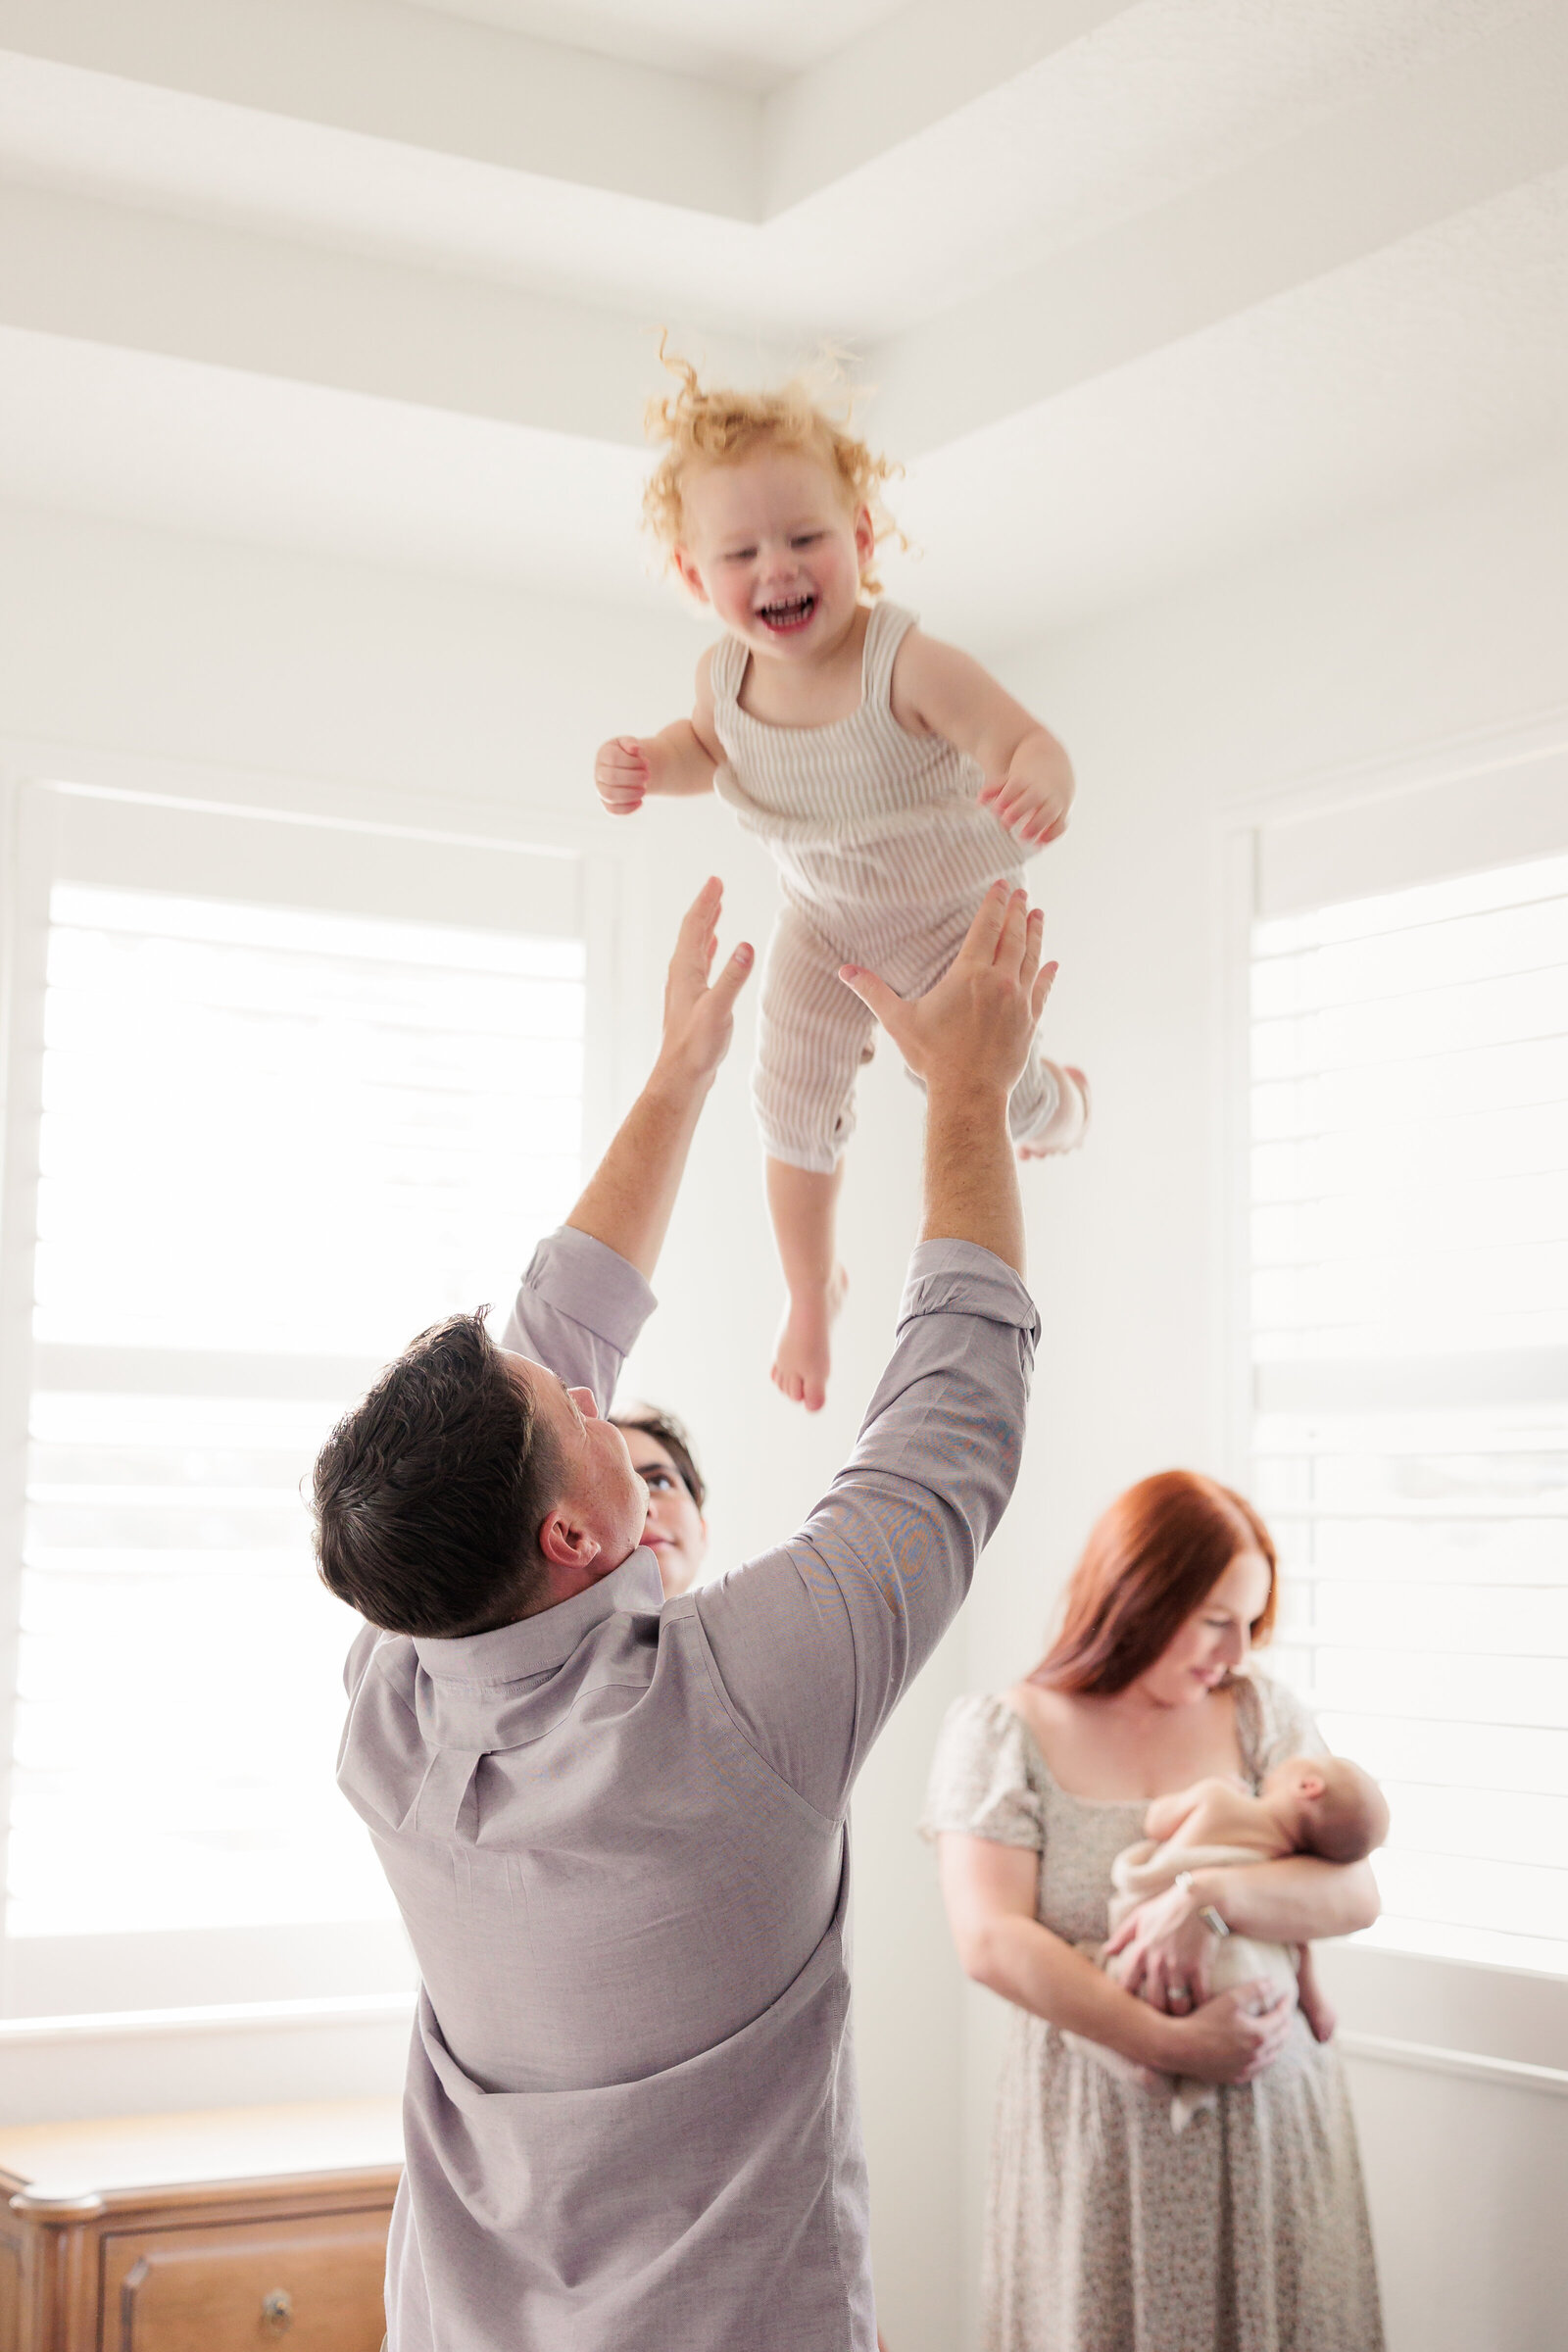 Dad tosses his little girl in the air while mom snuggles her new little brother in the background